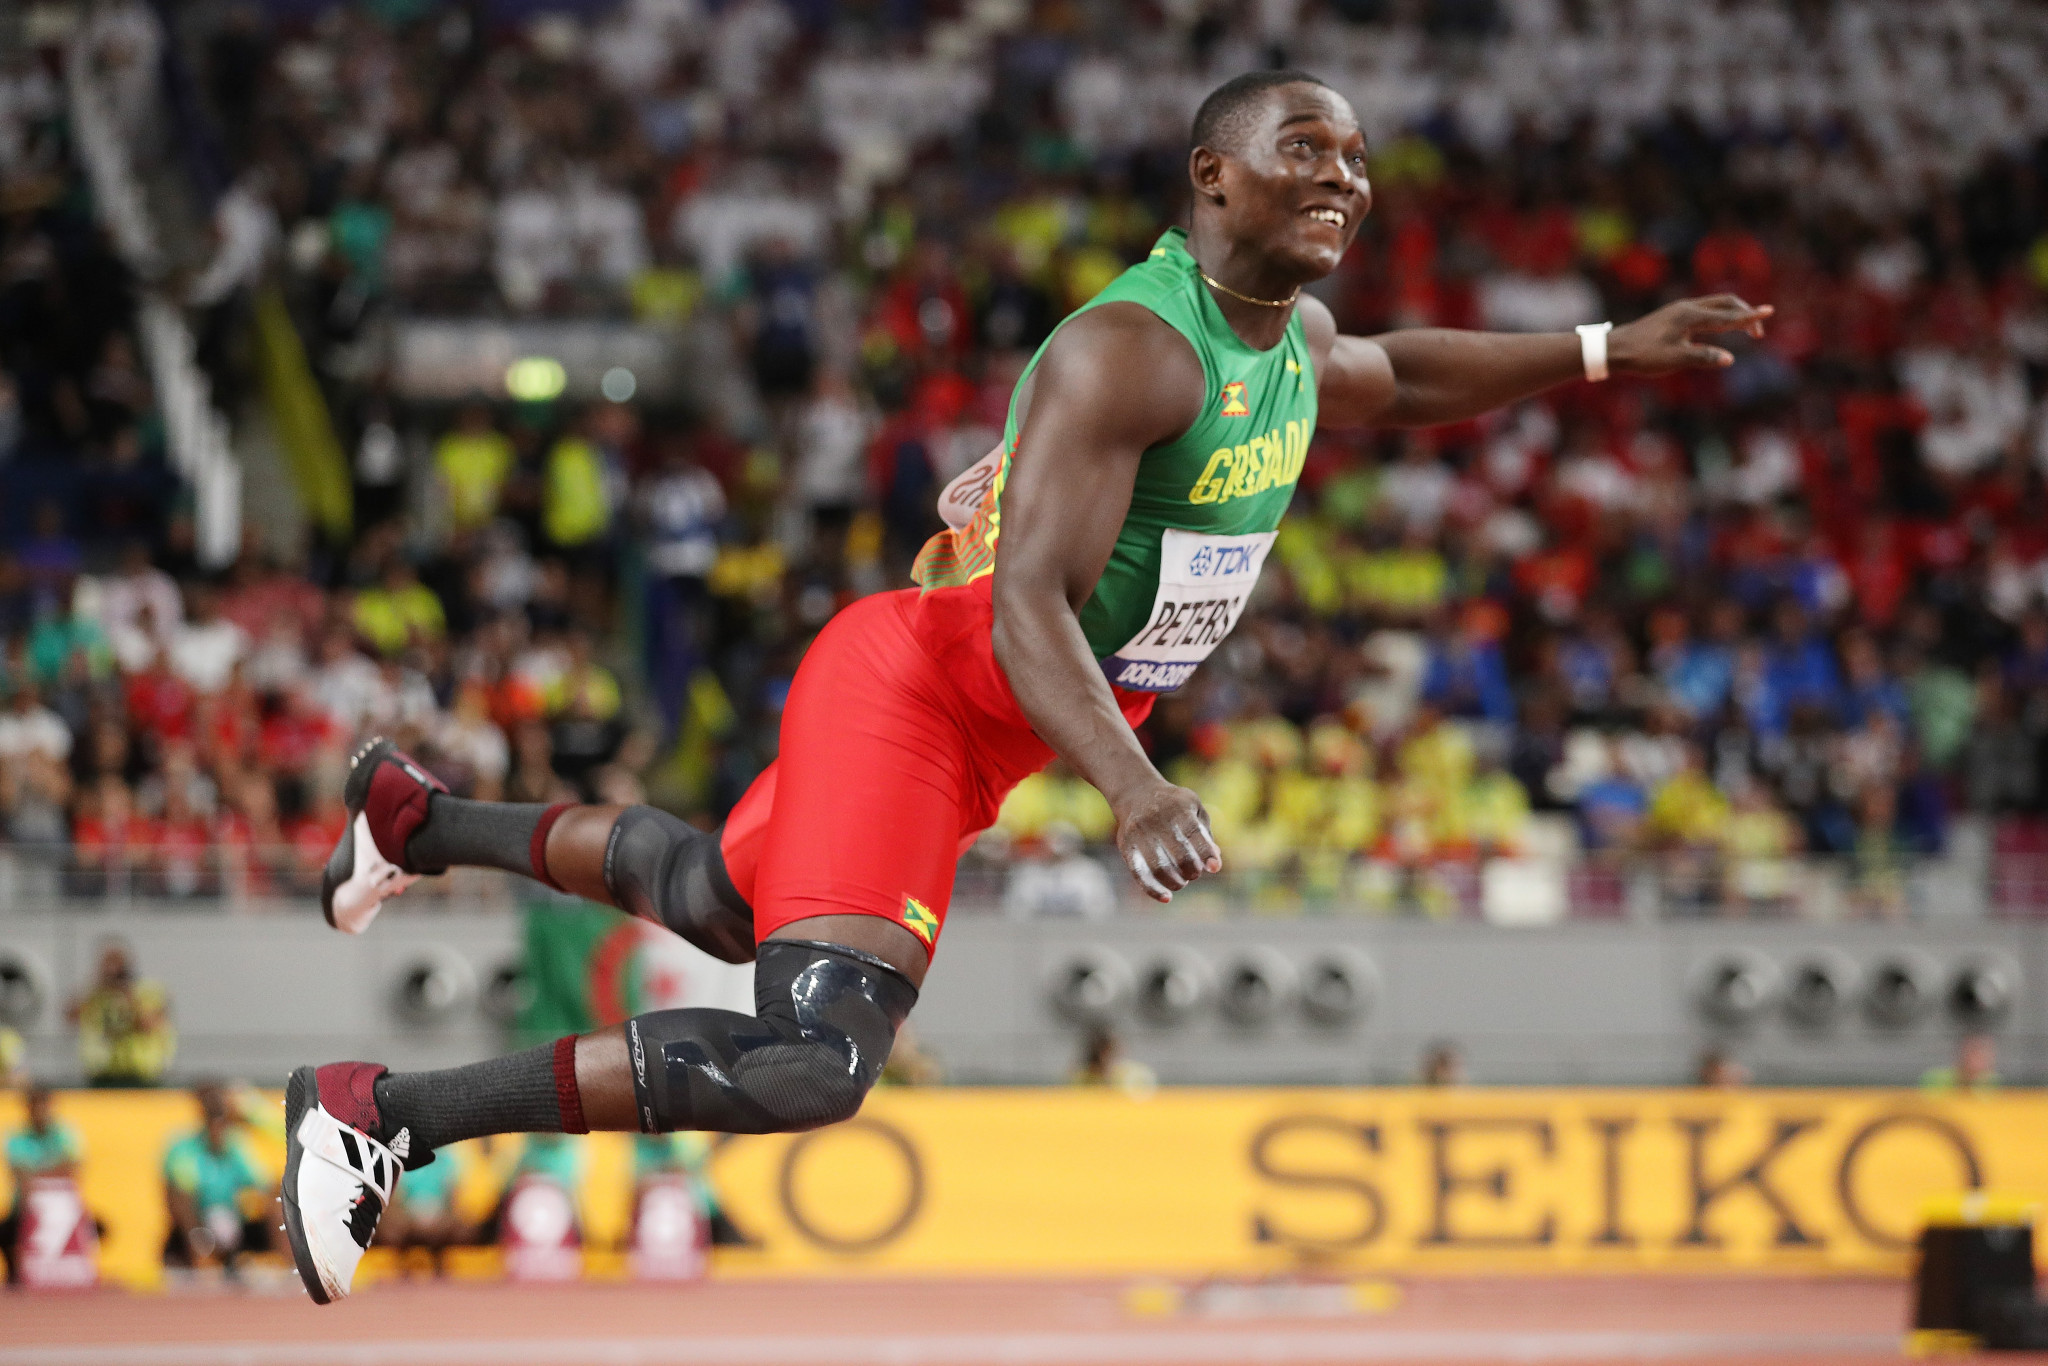 Lift-off for Grenada as they win gold on last day of IAAF World Championships